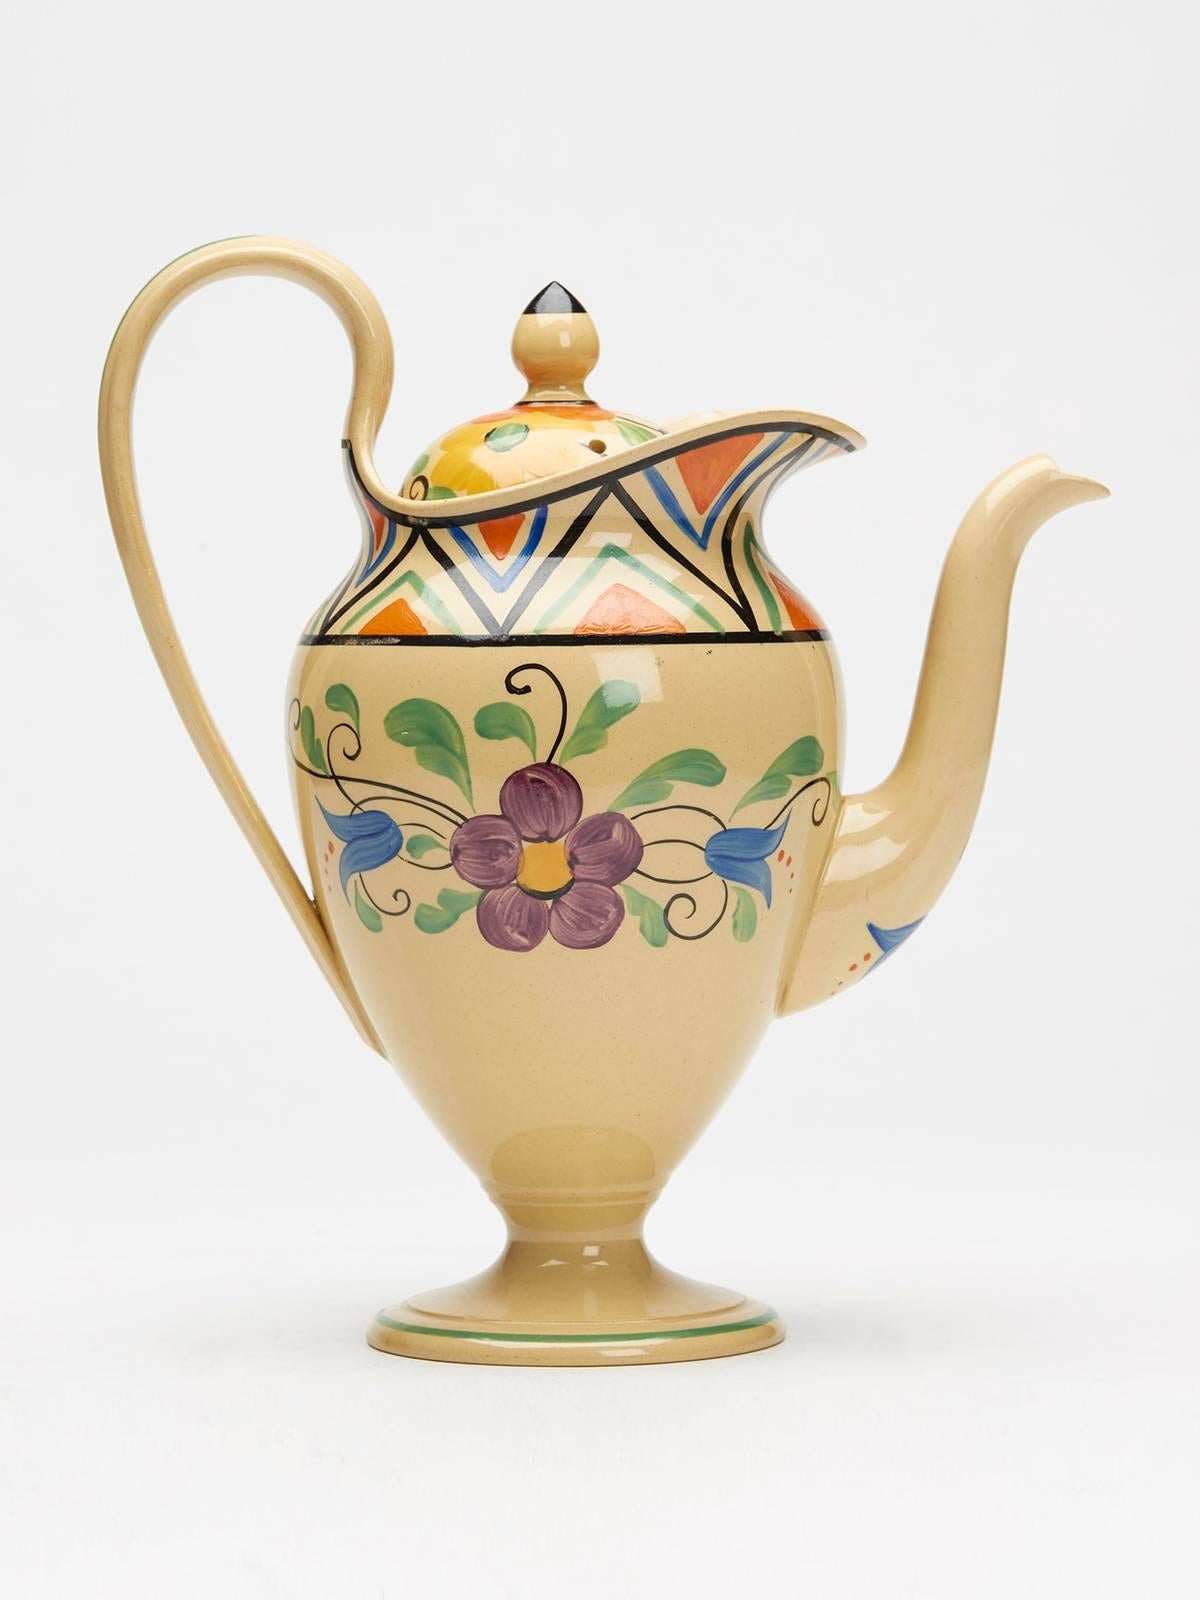 An Art Deco Wedgwood floral coffee pot and cover by Millicent (Milly) Taplin hand painted in brightly colored enamels with floral and geometrical designs on a drab (cane) colored body. This elegantly shaped coffee pot standing on a pedestal foot has